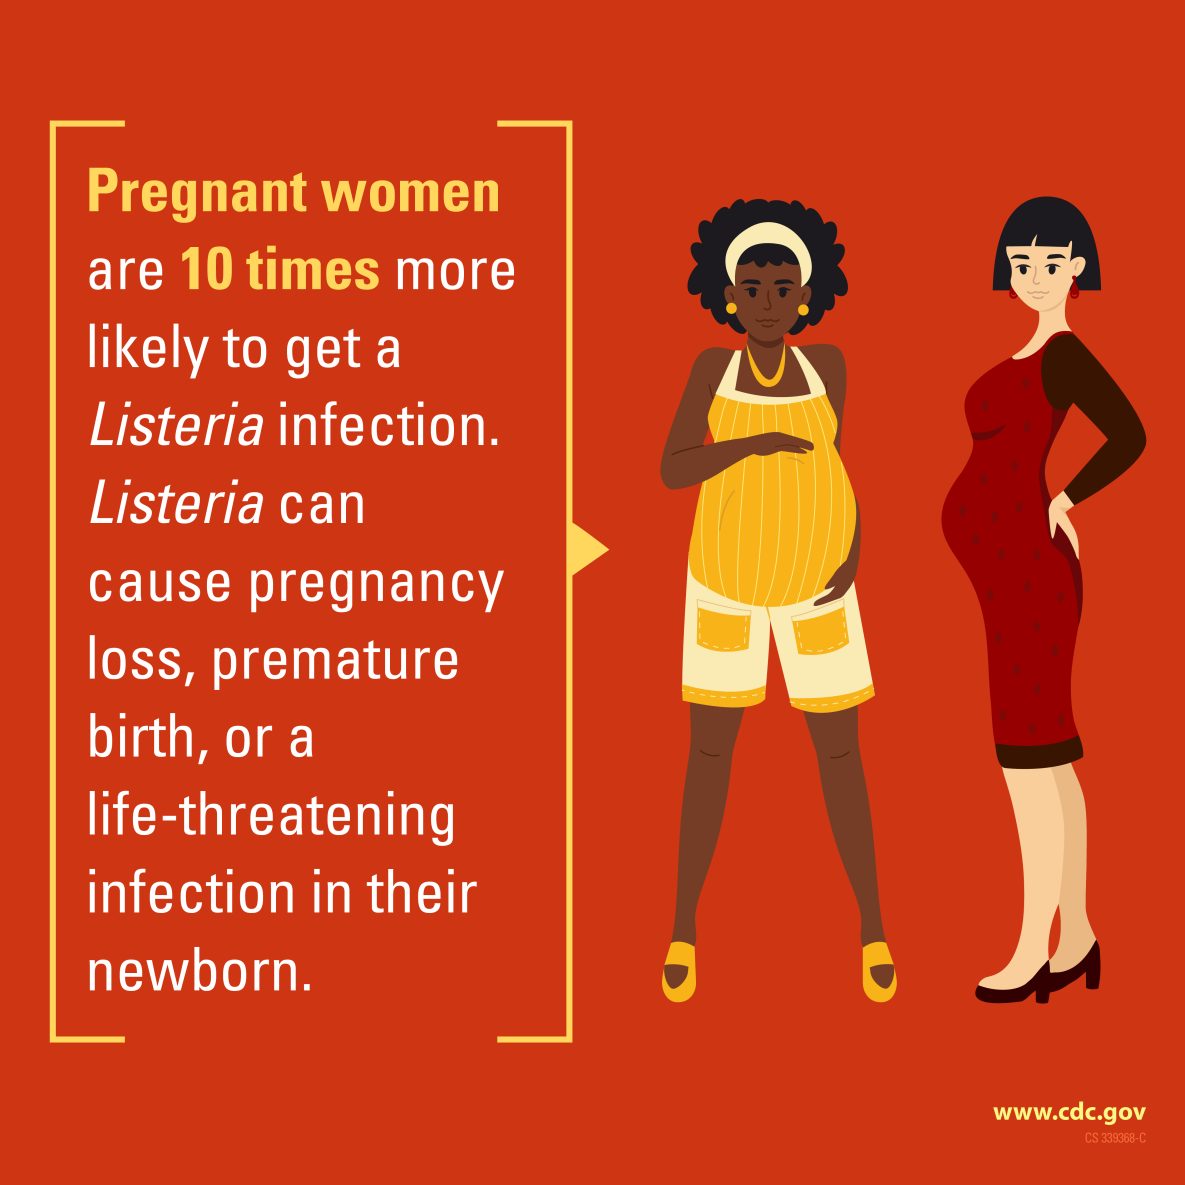 Pregnant women are 10 times more likely to get a Listeria infection.